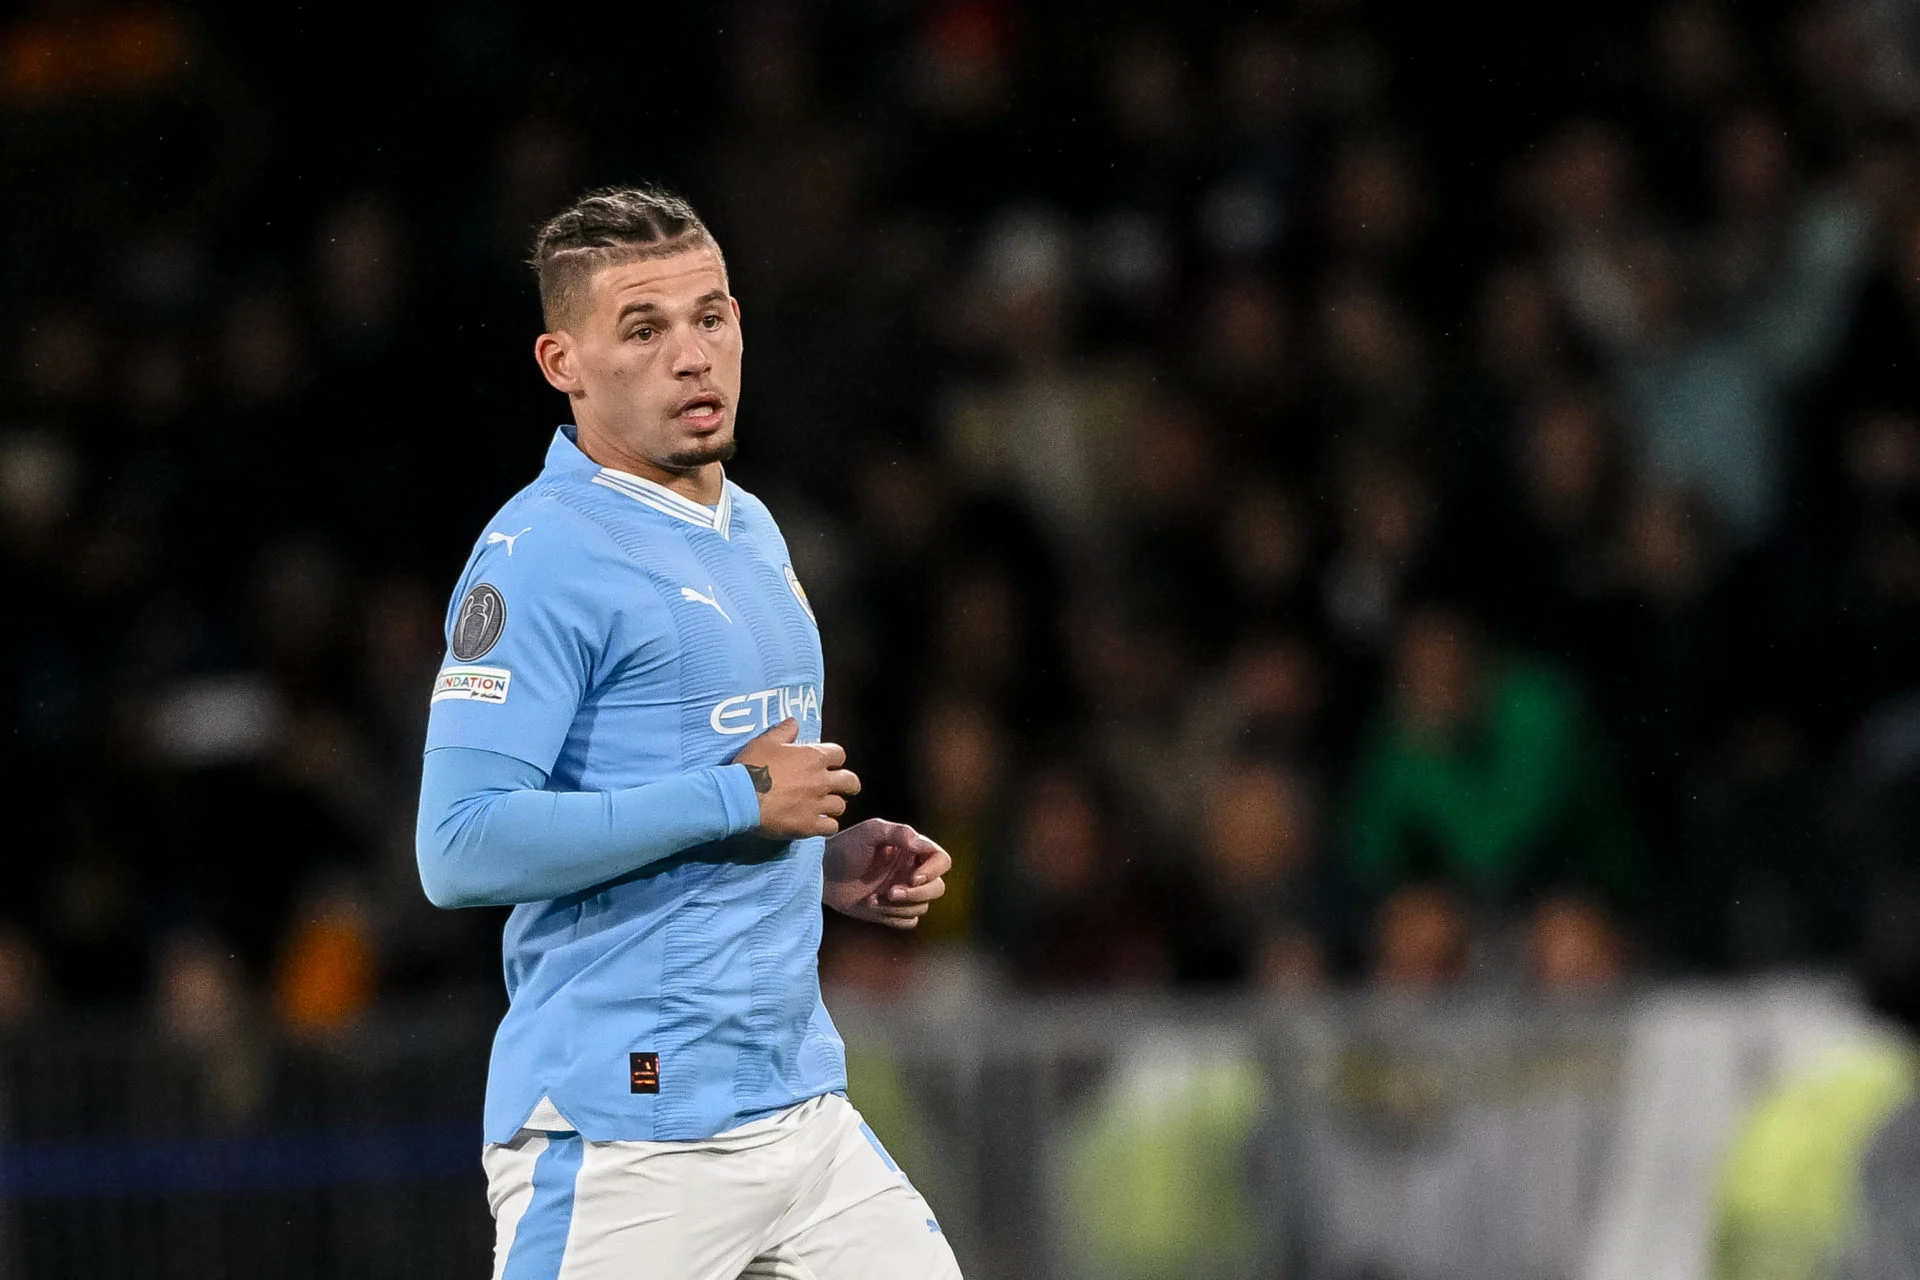 Kalvin Phillips has been blatantly put on the market by Manchester City coach Pep Guardiola, and Juventus are waiting in the wings.